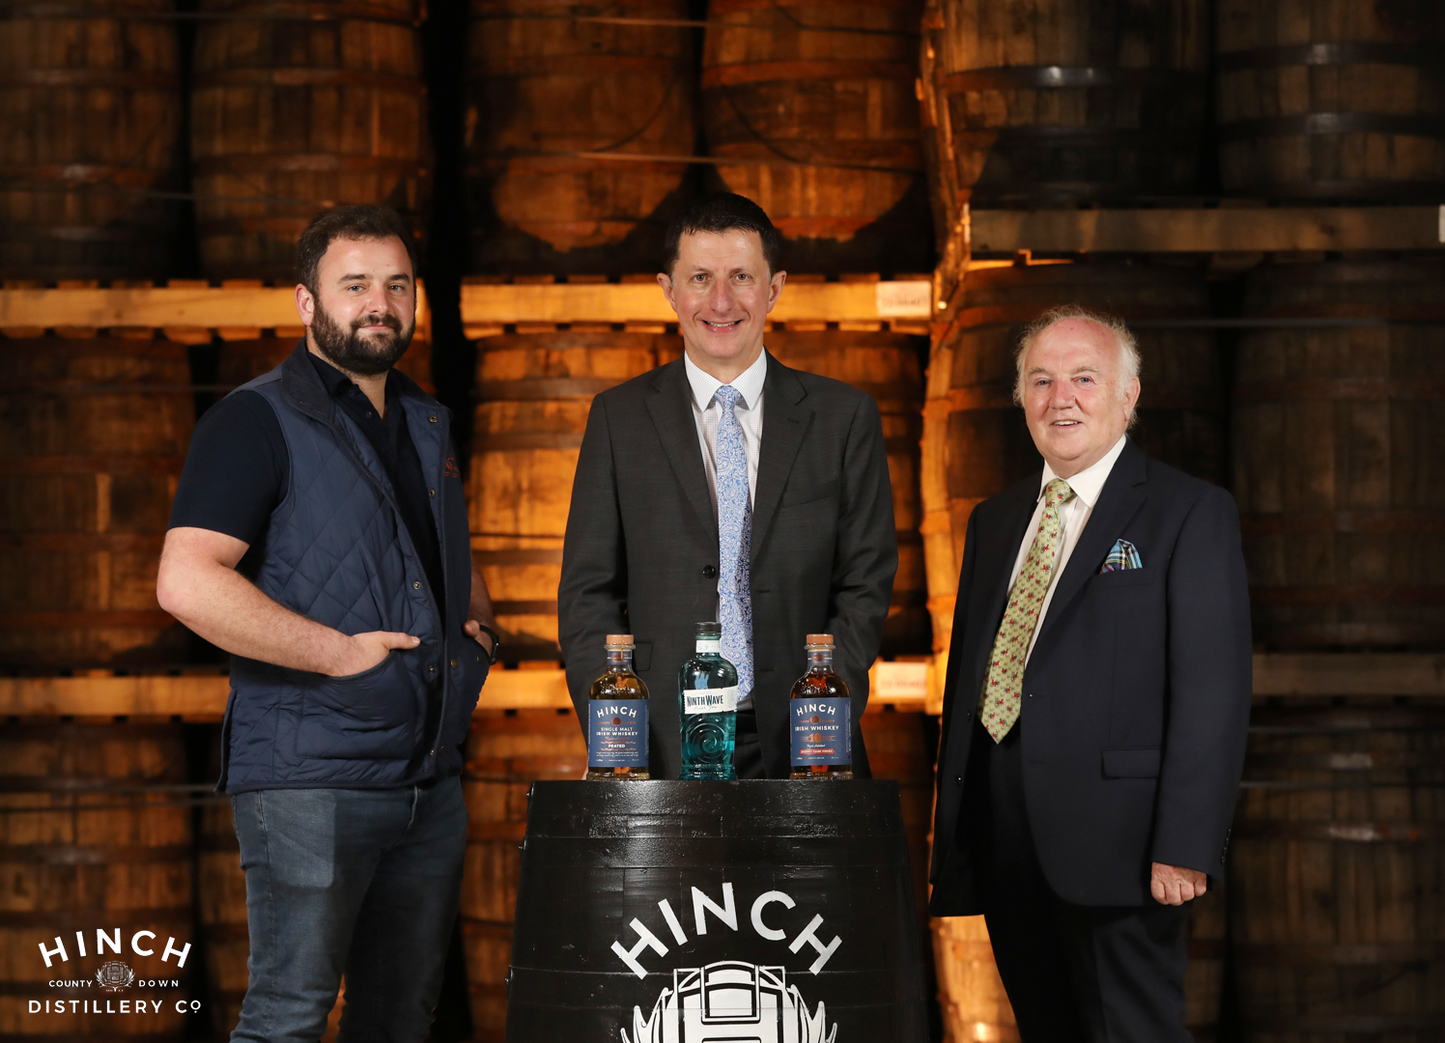 Hinch Distillery's New Maturation Warehouse & Visitors Centre Experience